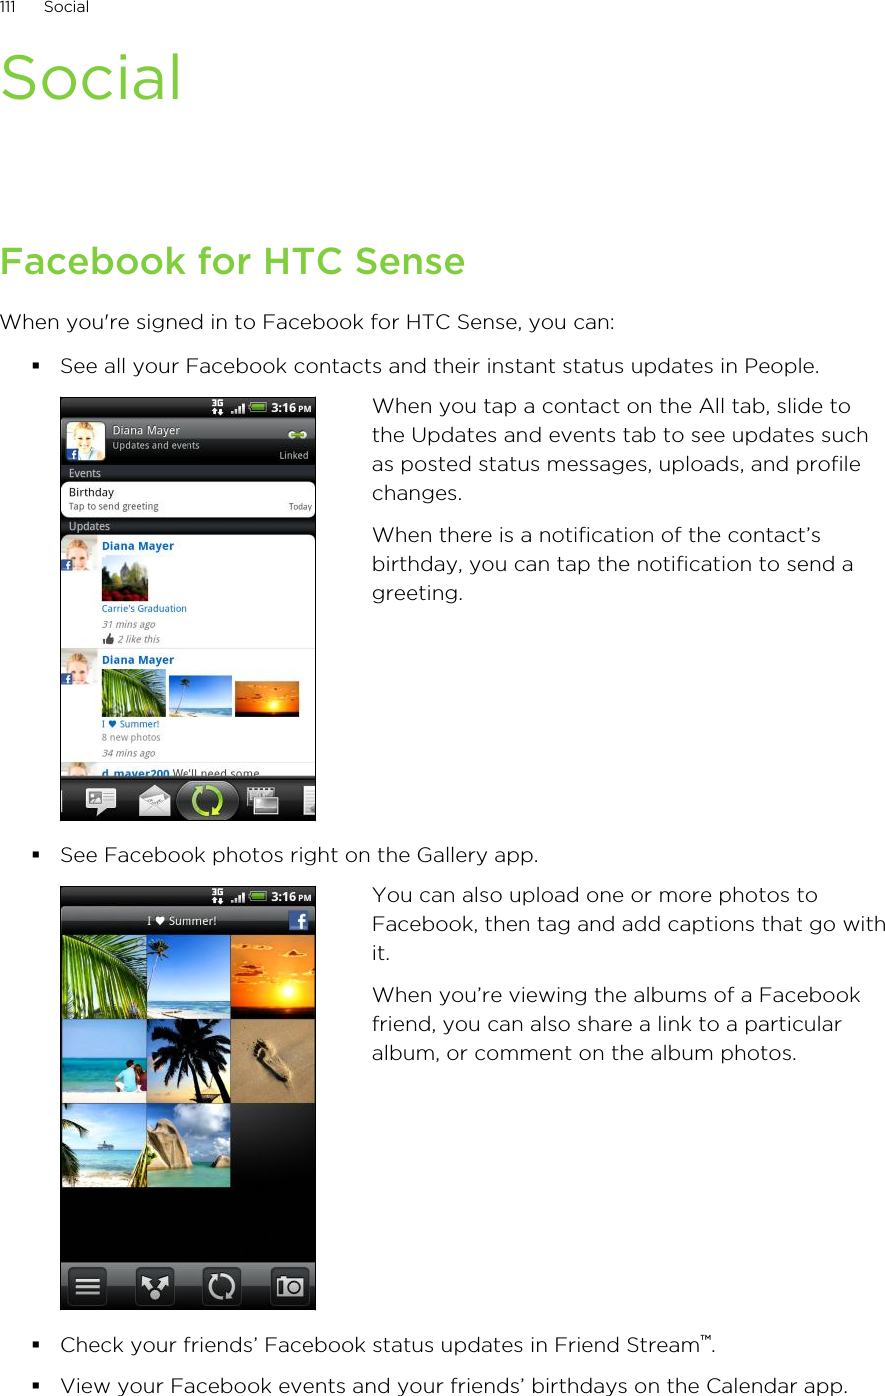 SocialFacebook for HTC SenseWhen you&apos;re signed in to Facebook for HTC Sense, you can:§See all your Facebook contacts and their instant status updates in People.When you tap a contact on the All tab, slide tothe Updates and events tab to see updates suchas posted status messages, uploads, and profilechanges.When there is a notification of the contact’sbirthday, you can tap the notification to send agreeting.§See Facebook photos right on the Gallery app.You can also upload one or more photos toFacebook, then tag and add captions that go withit.When you’re viewing the albums of a Facebookfriend, you can also share a link to a particularalbum, or comment on the album photos.§Check your friends’ Facebook status updates in Friend Stream™.§View your Facebook events and your friends’ birthdays on the Calendar app.111 Social